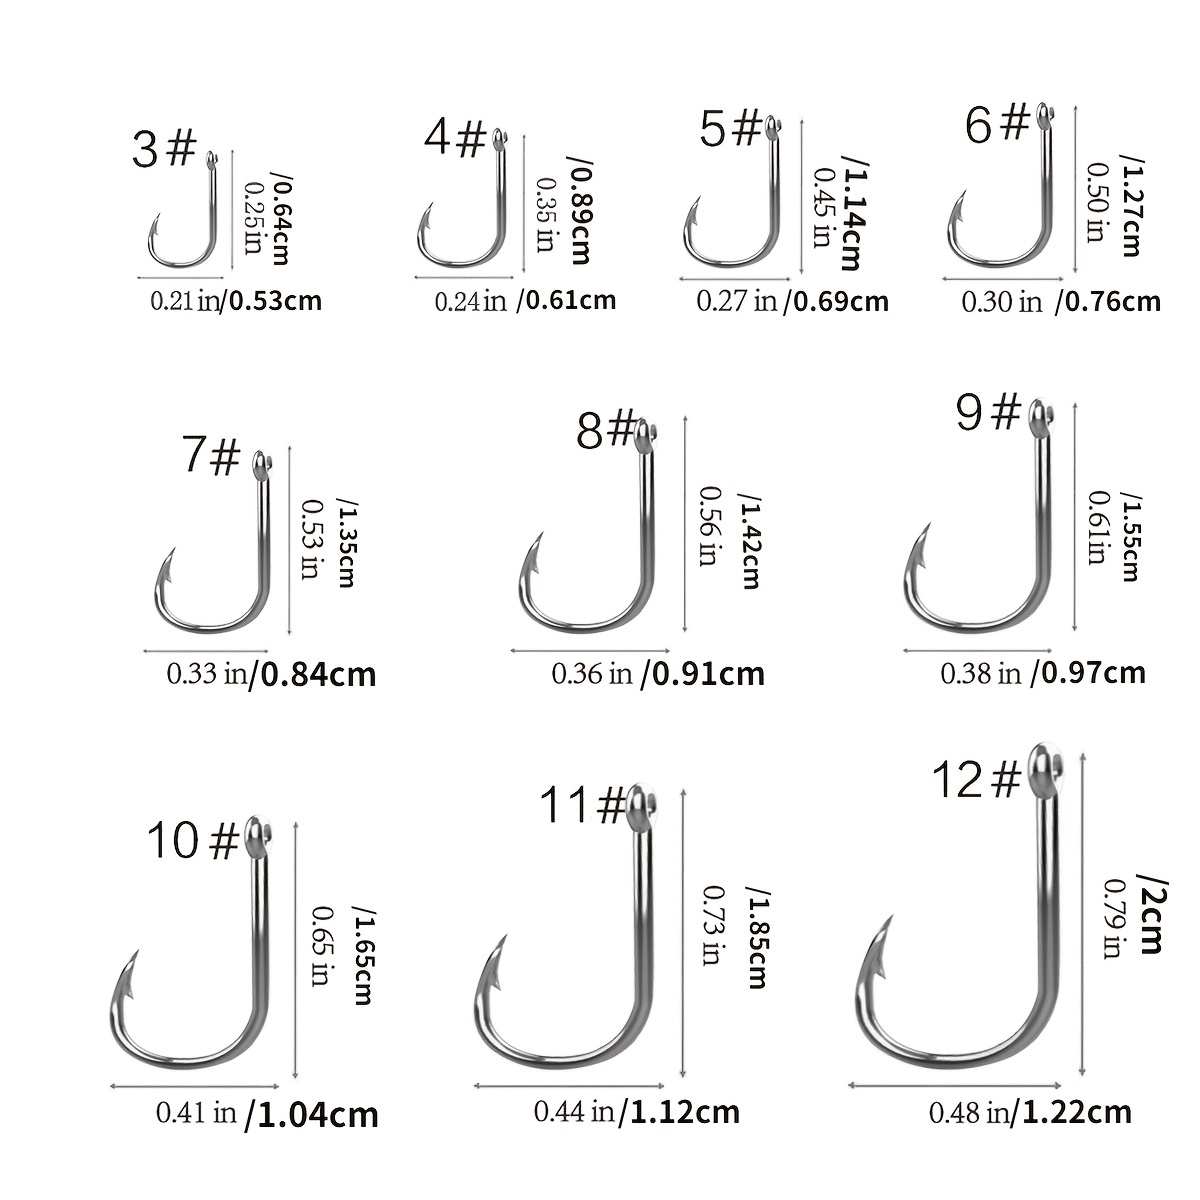  500PCS/100PCS ReeMoo Premium Fishing Hooks, 10 Sizes/4 Sizes  Carbon Steel Fishing Hooks W/Portable Plastic Box, Strong Sharp Fish Hook  with Barbs for Freshwater/Seawater : Sports & Outdoors